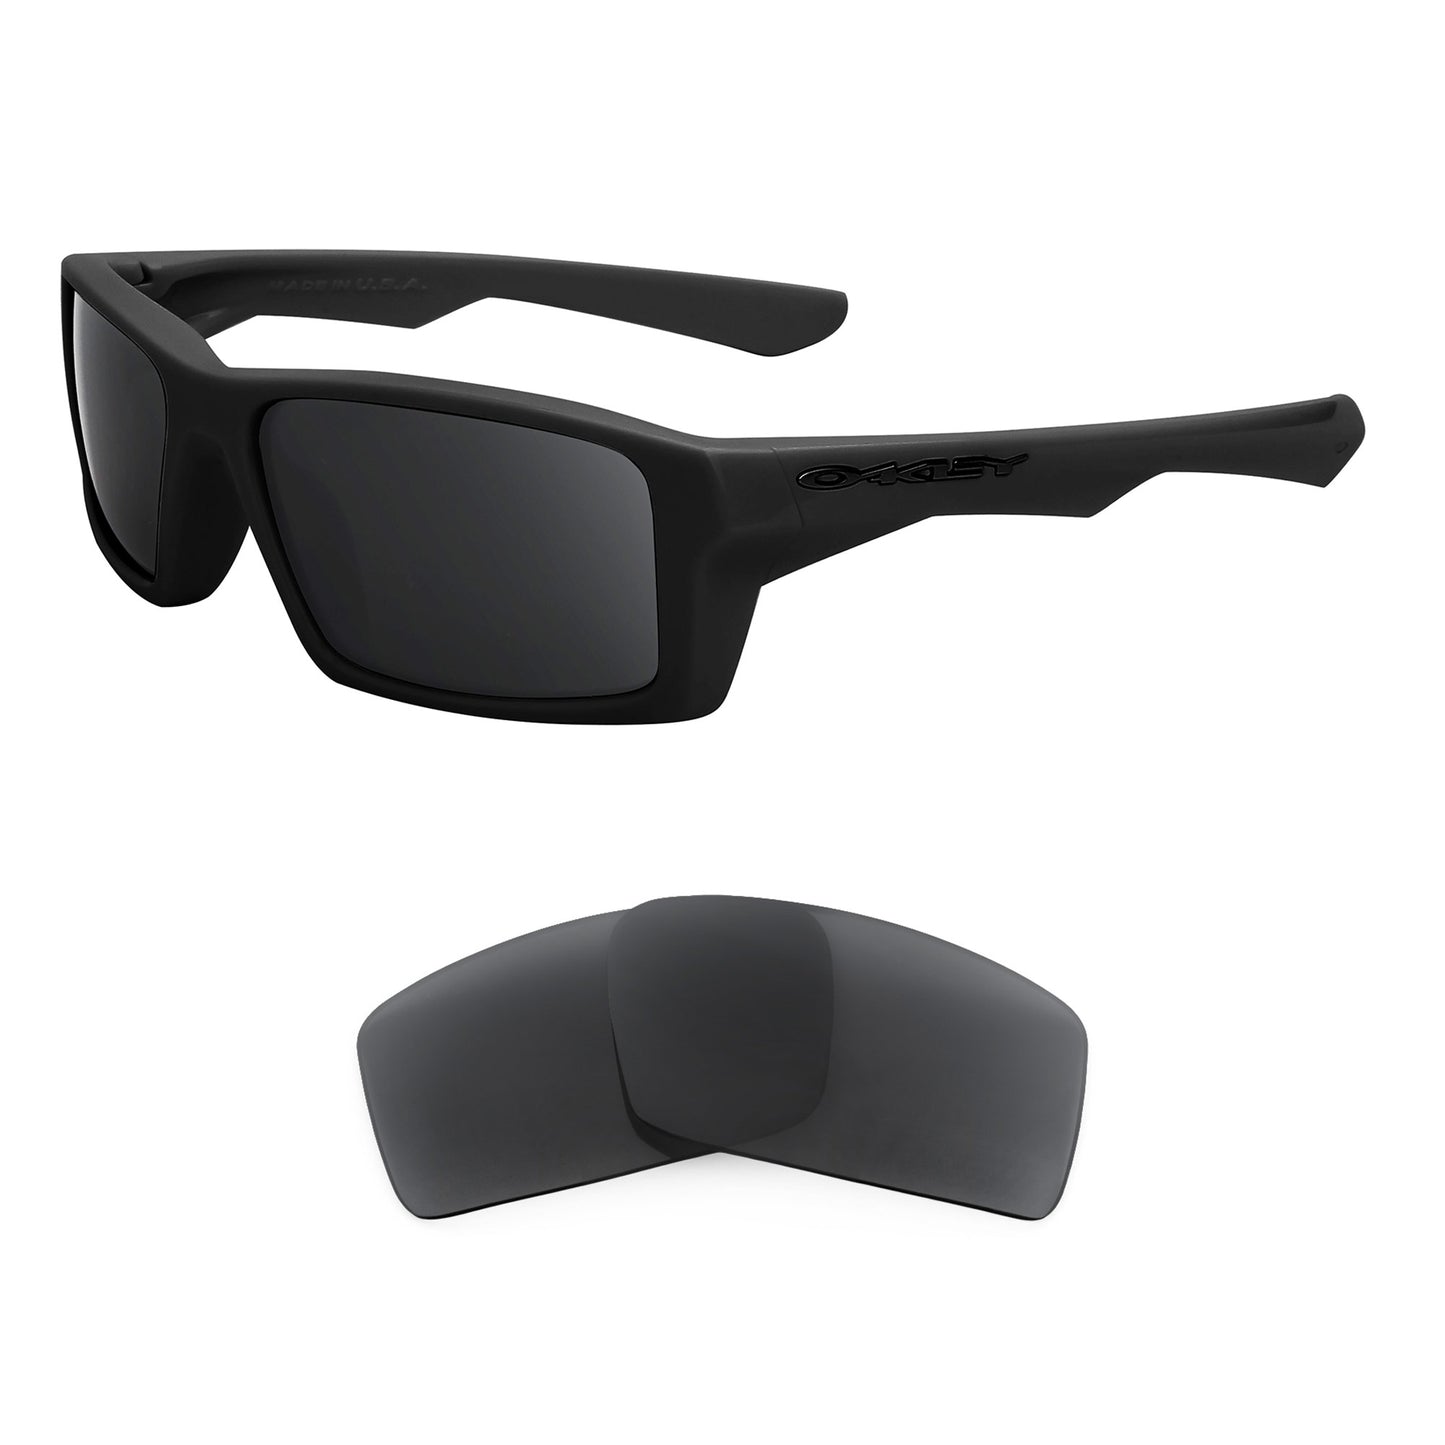 Oakley Twitch sunglasses with replacement lenses